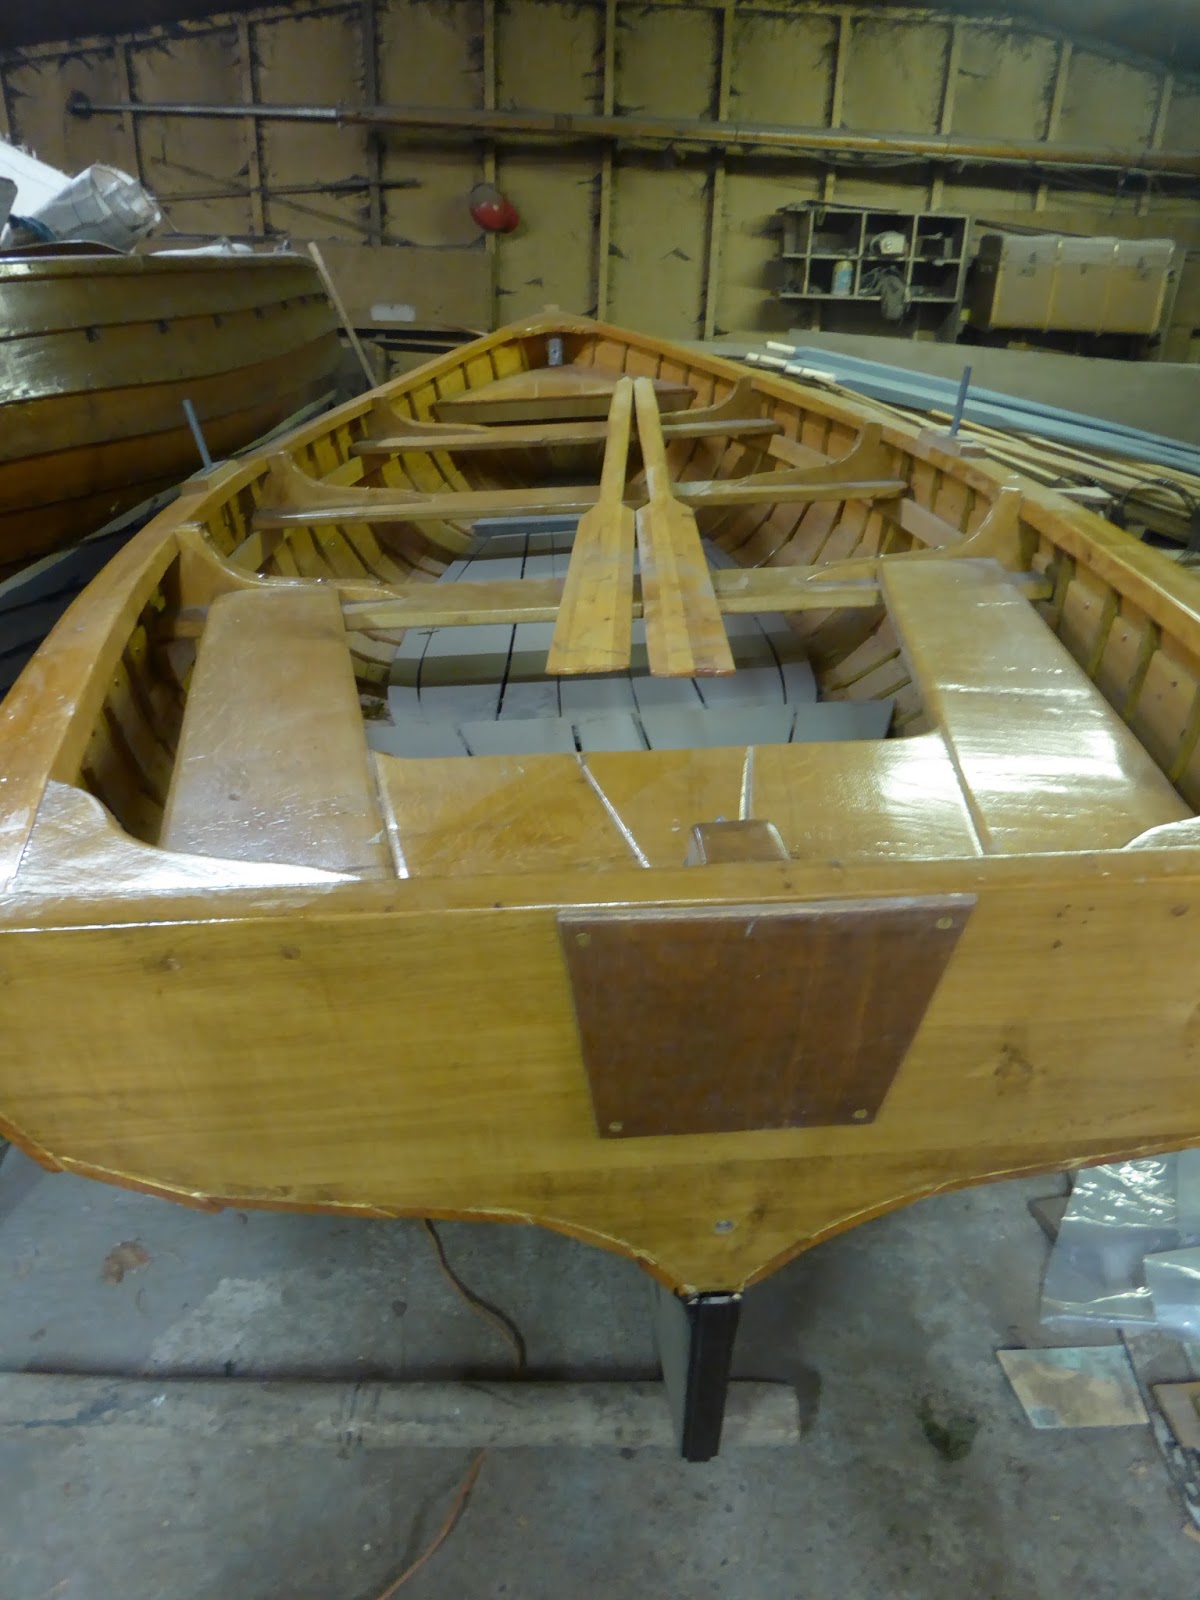 greek wooden boats: the history of traditional